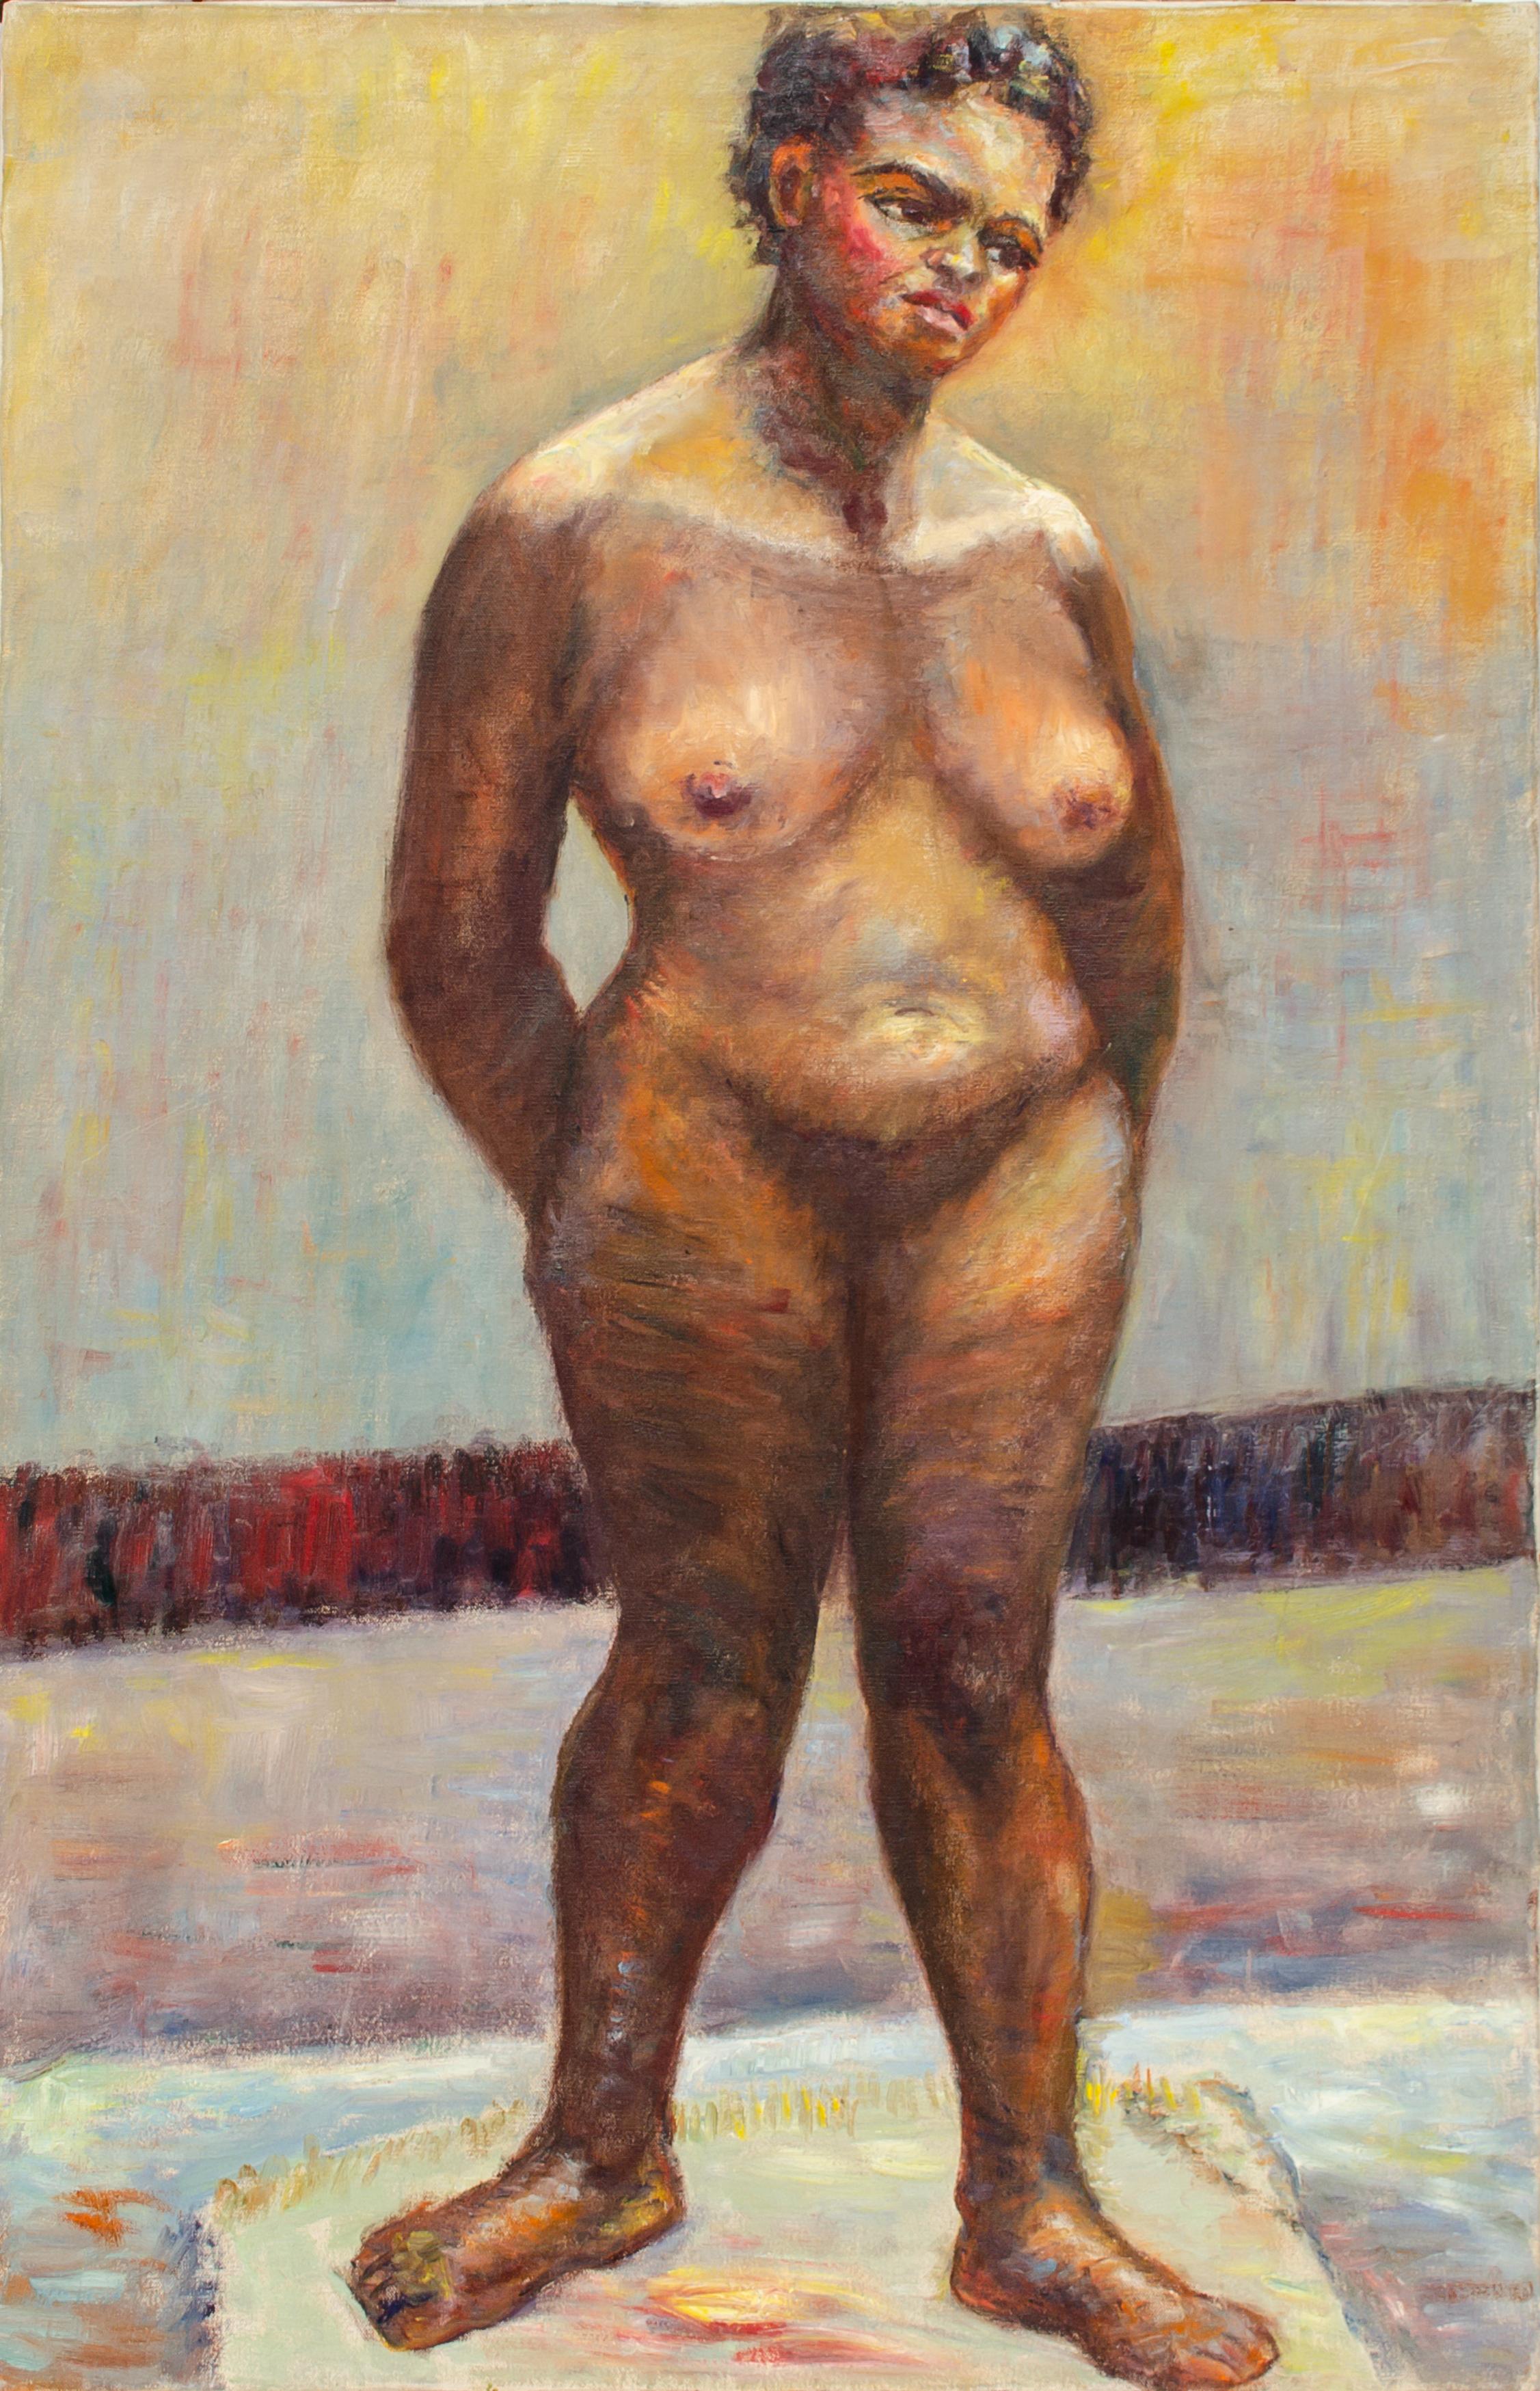 Modernist Nude Figure Painting by Alma Davies, Student of Raphael Soyer